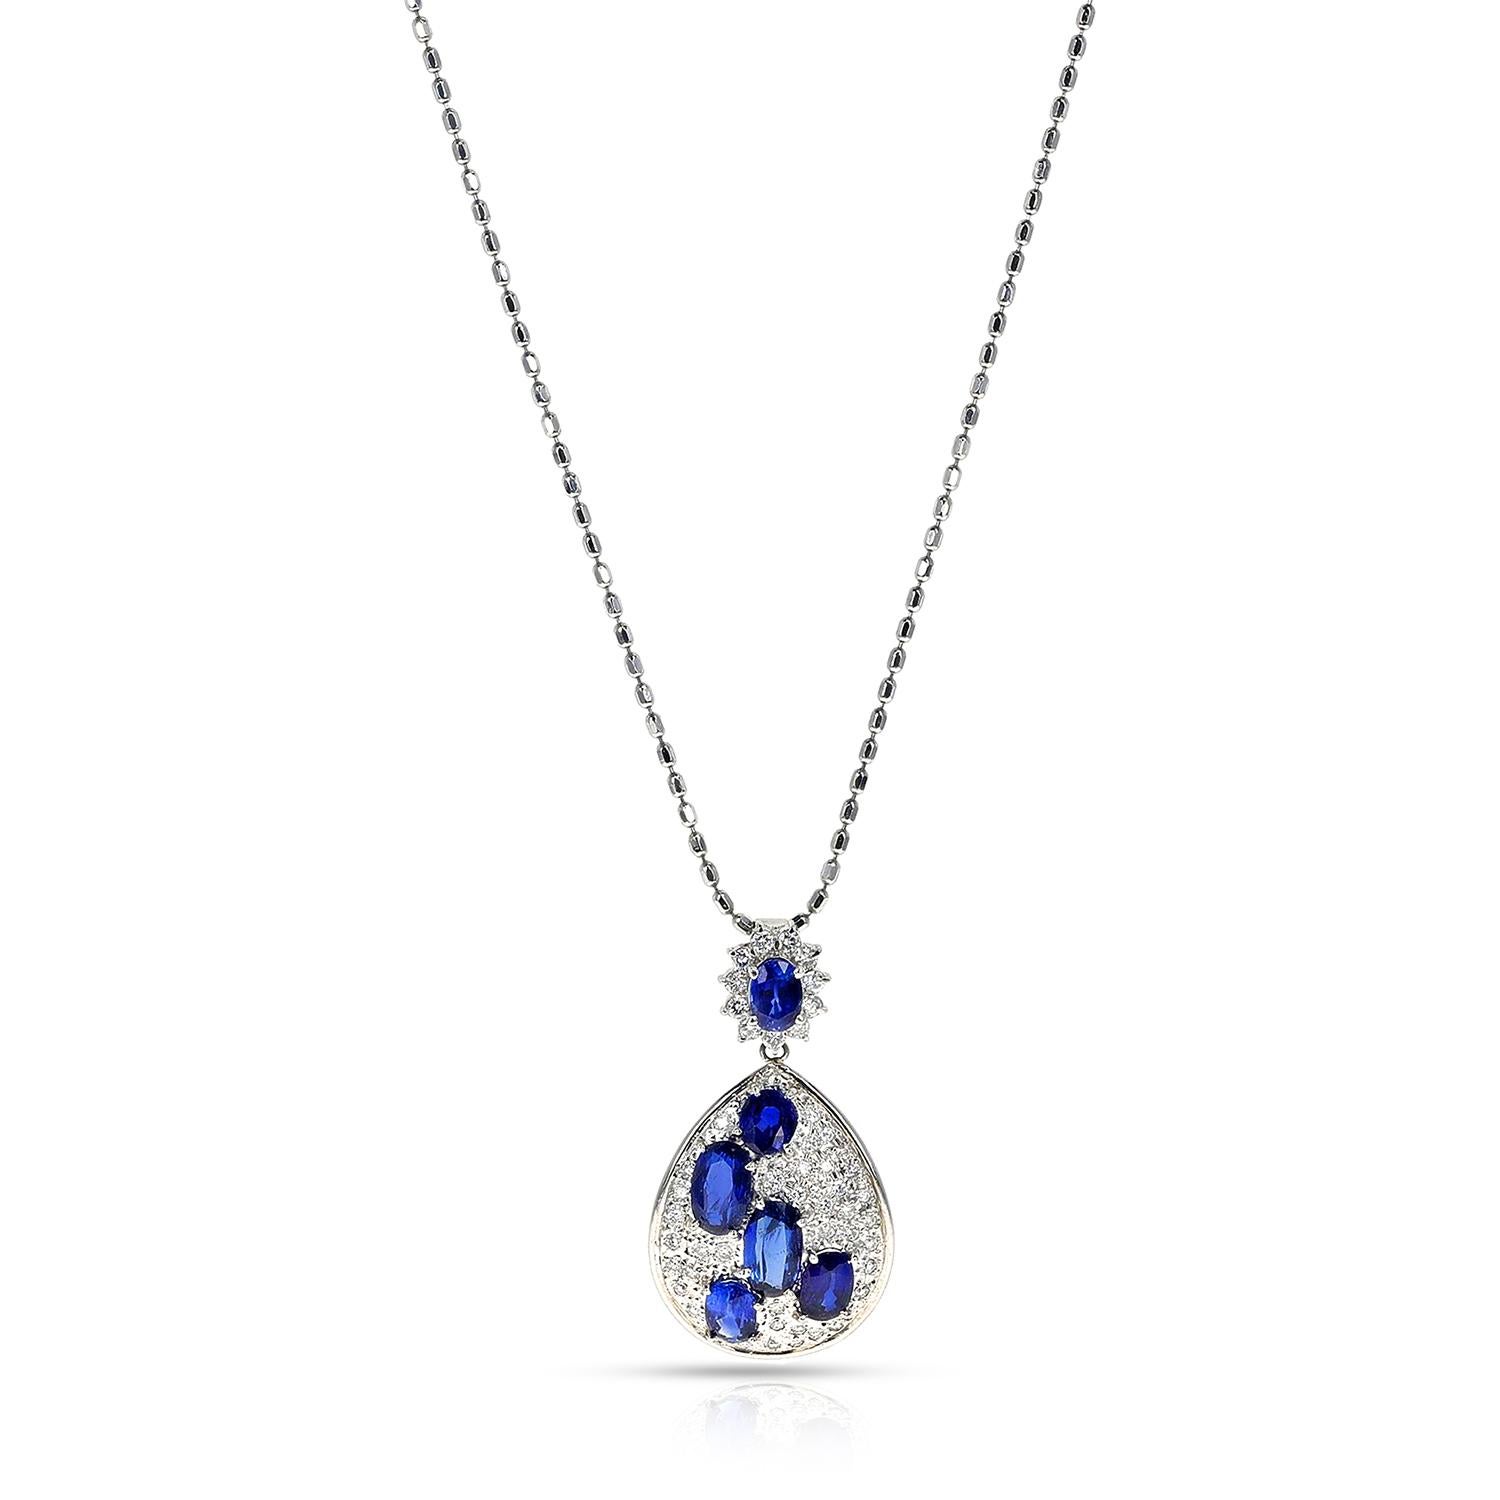 A Pendant Necklace with Six Oval Sapphires and Diamonds made in Platinum with a chain. The sapphires weigh appx. 5.91 carats and the diamonds weigh appx. 0.71 carats. The total weight of the necklace is 15.86 grams. 